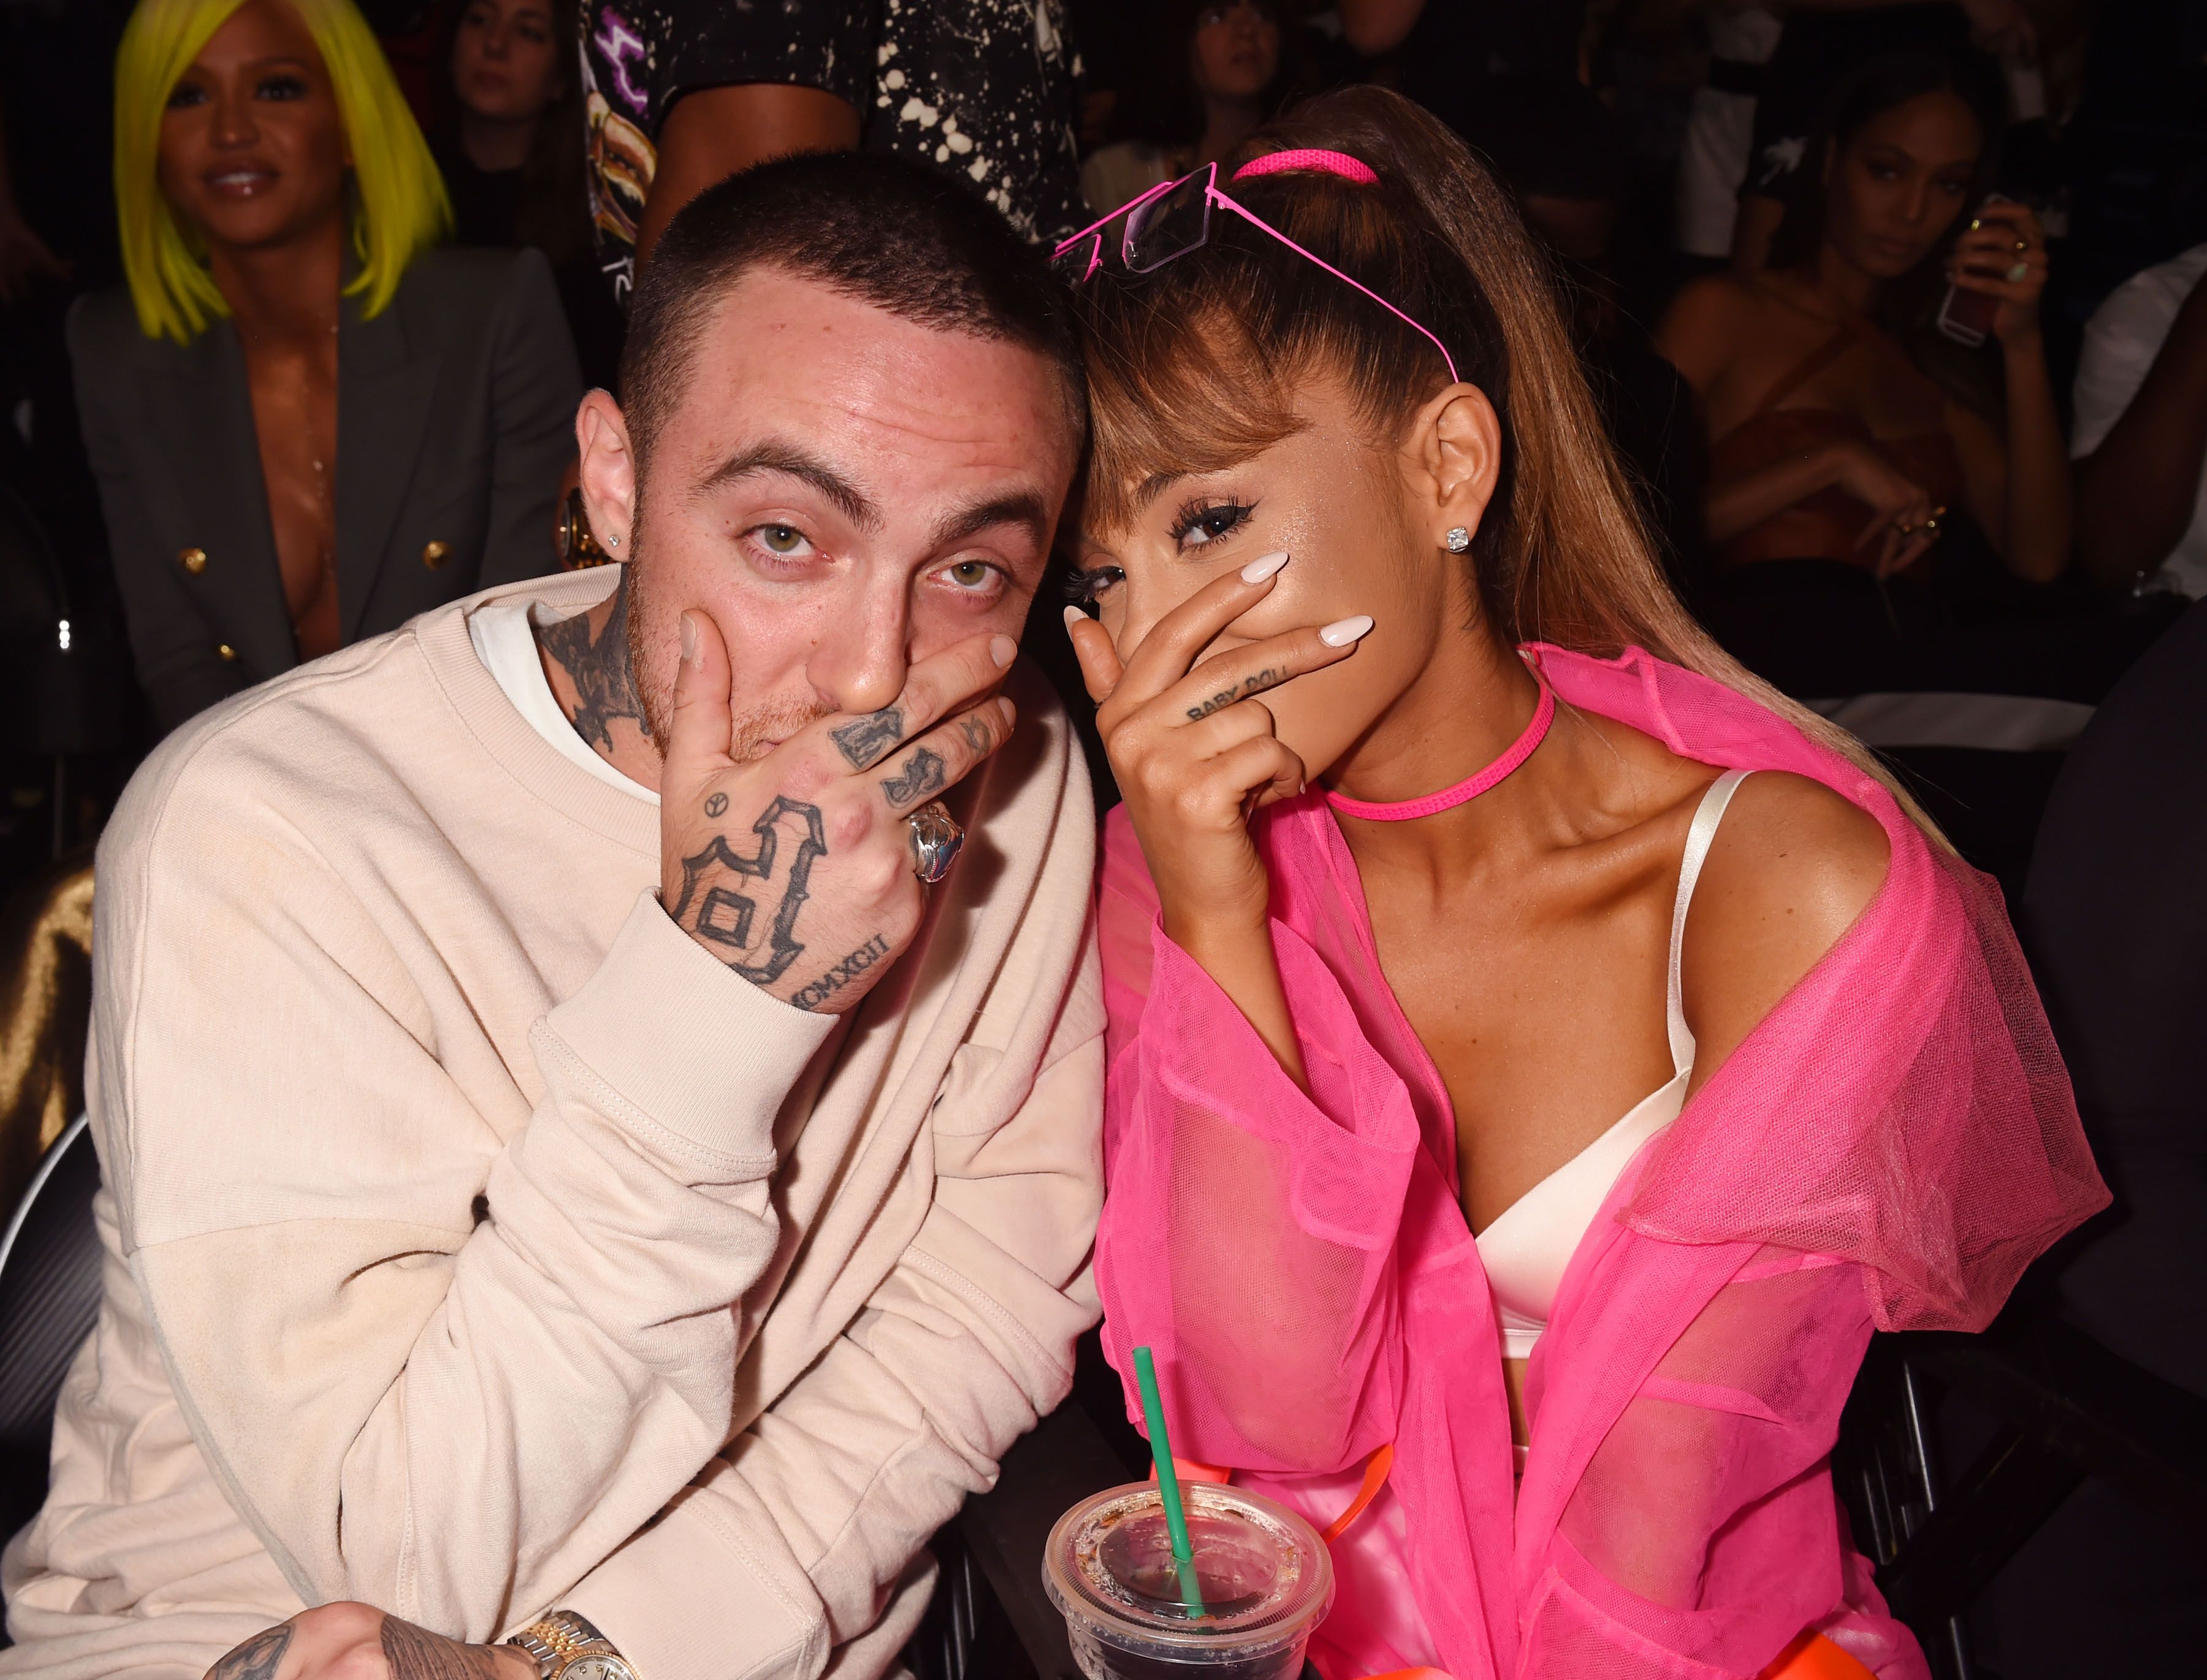 Mac Miller and Ariana Grande at Madison Square Garden on August 28, 2016, in New York City. | Source: Getty Images